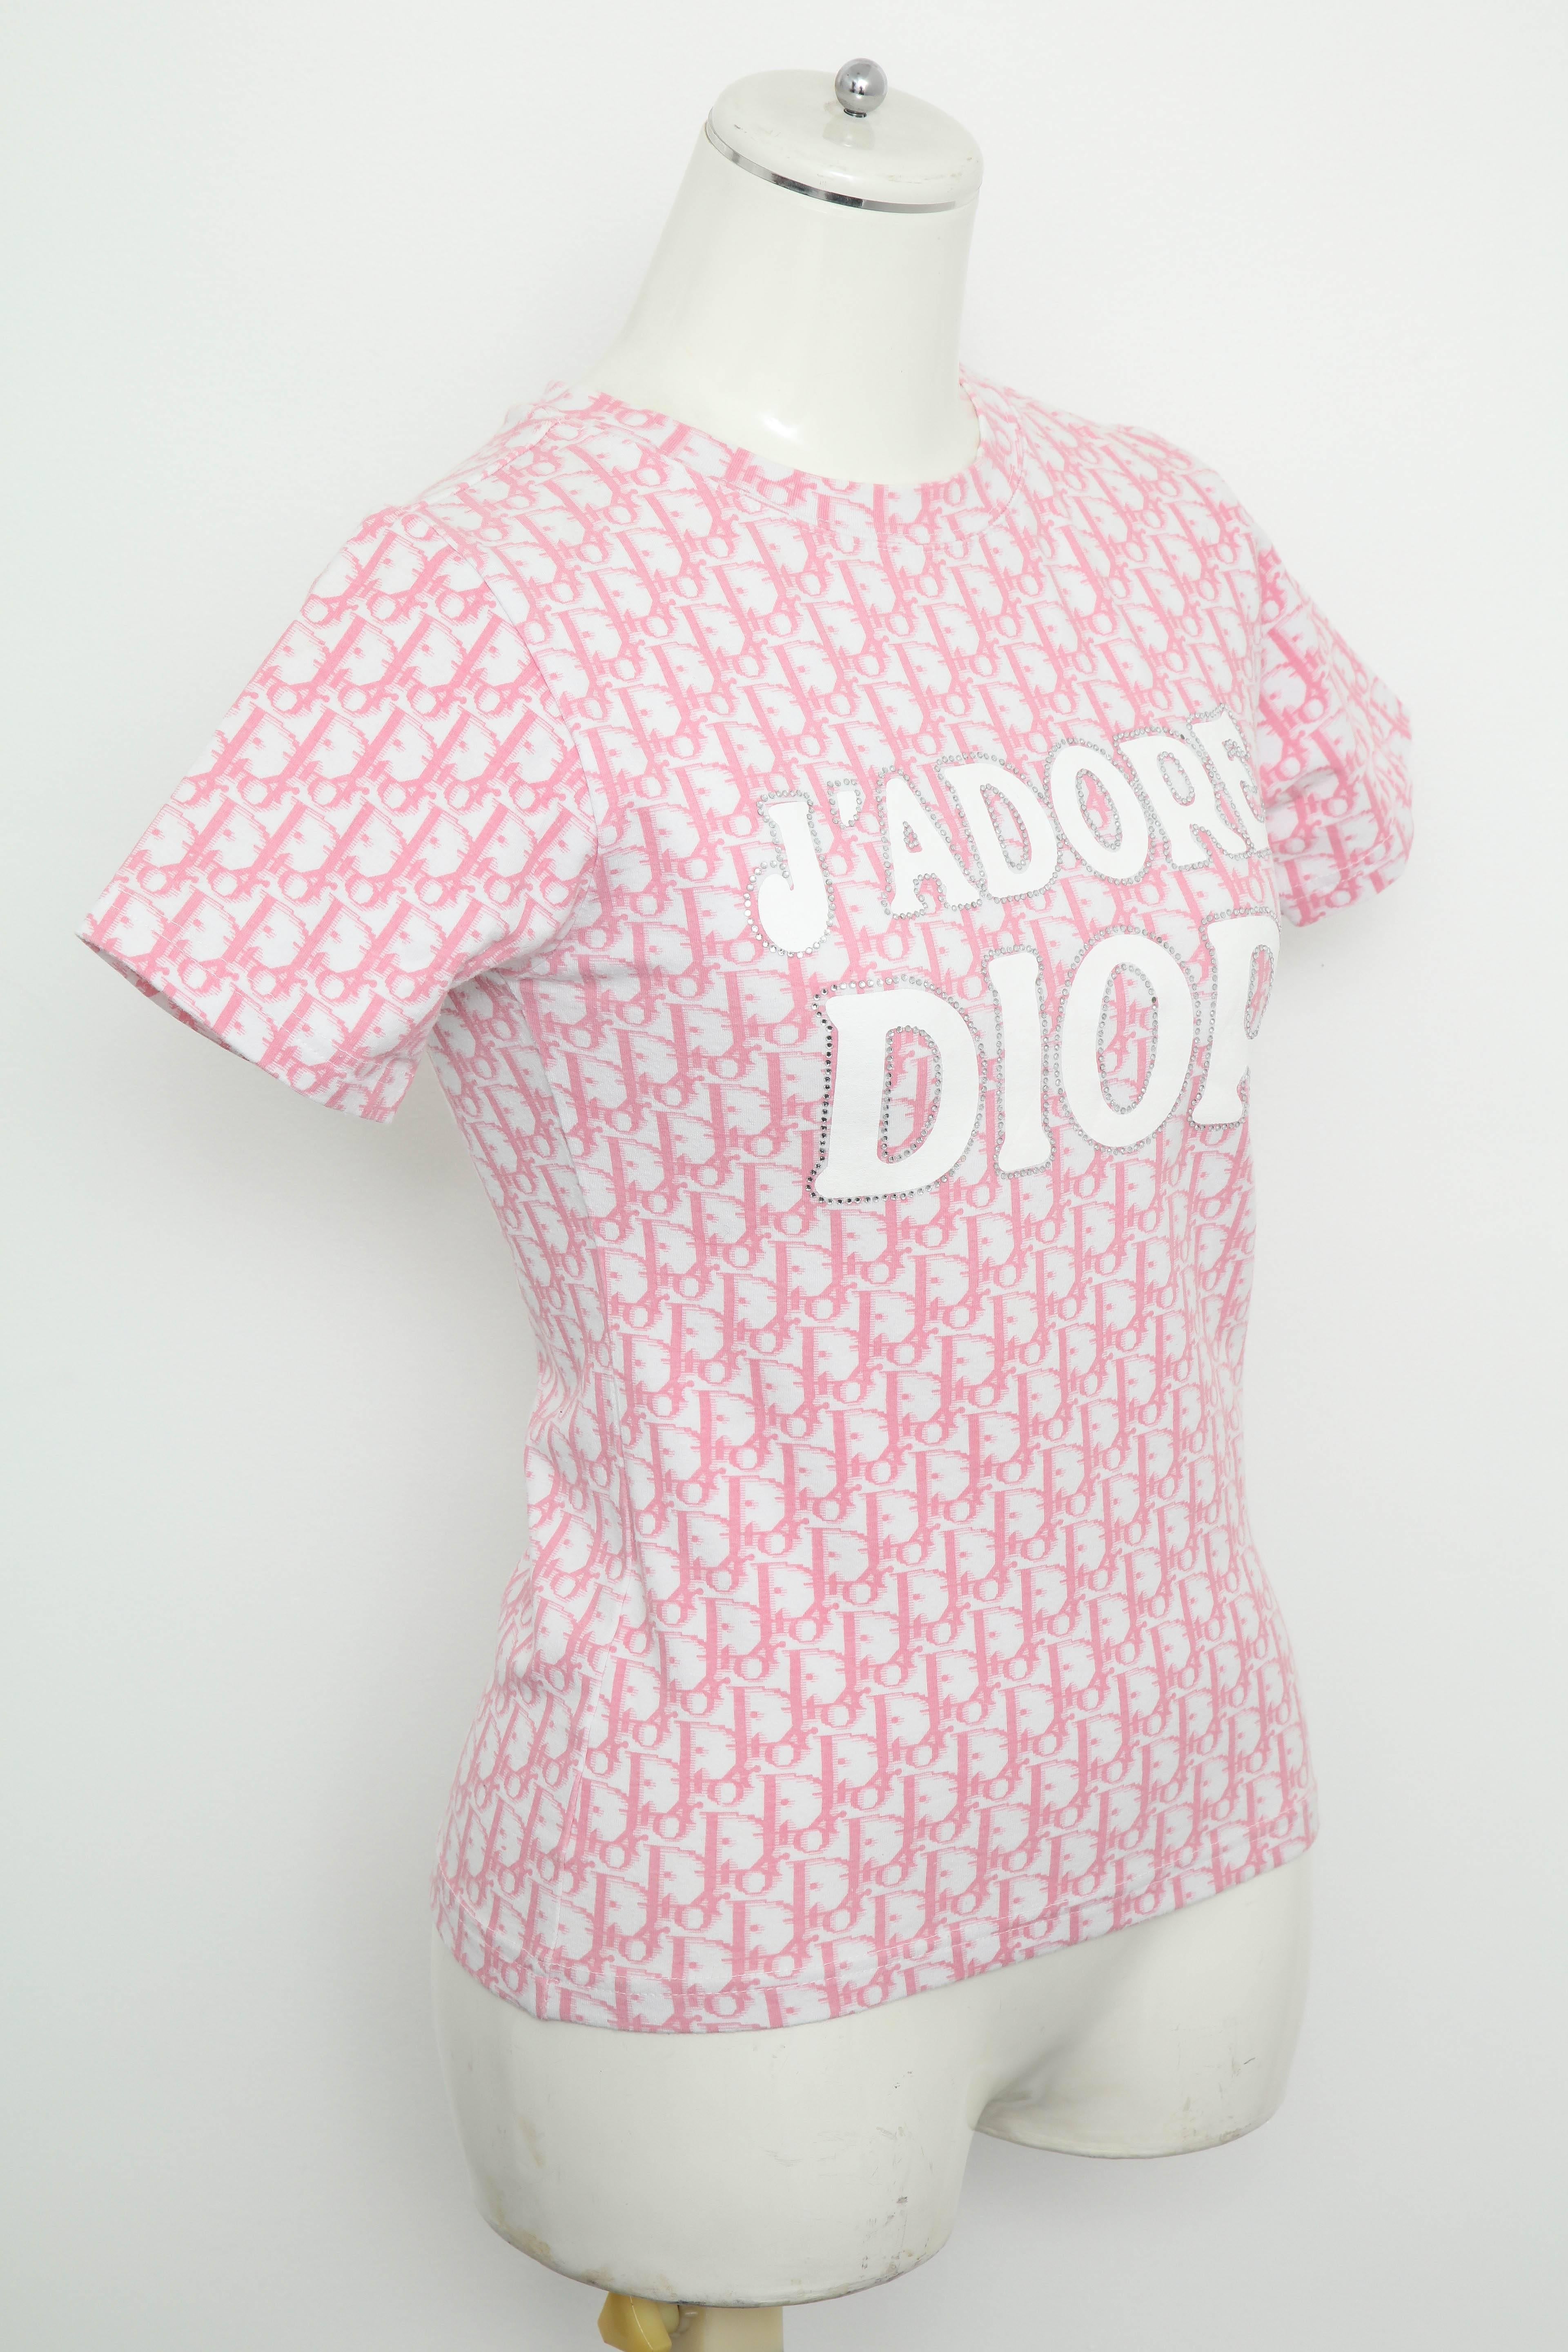 Christian Dior by John Galliano Pink Trotter Logo Shirt For Sale 3